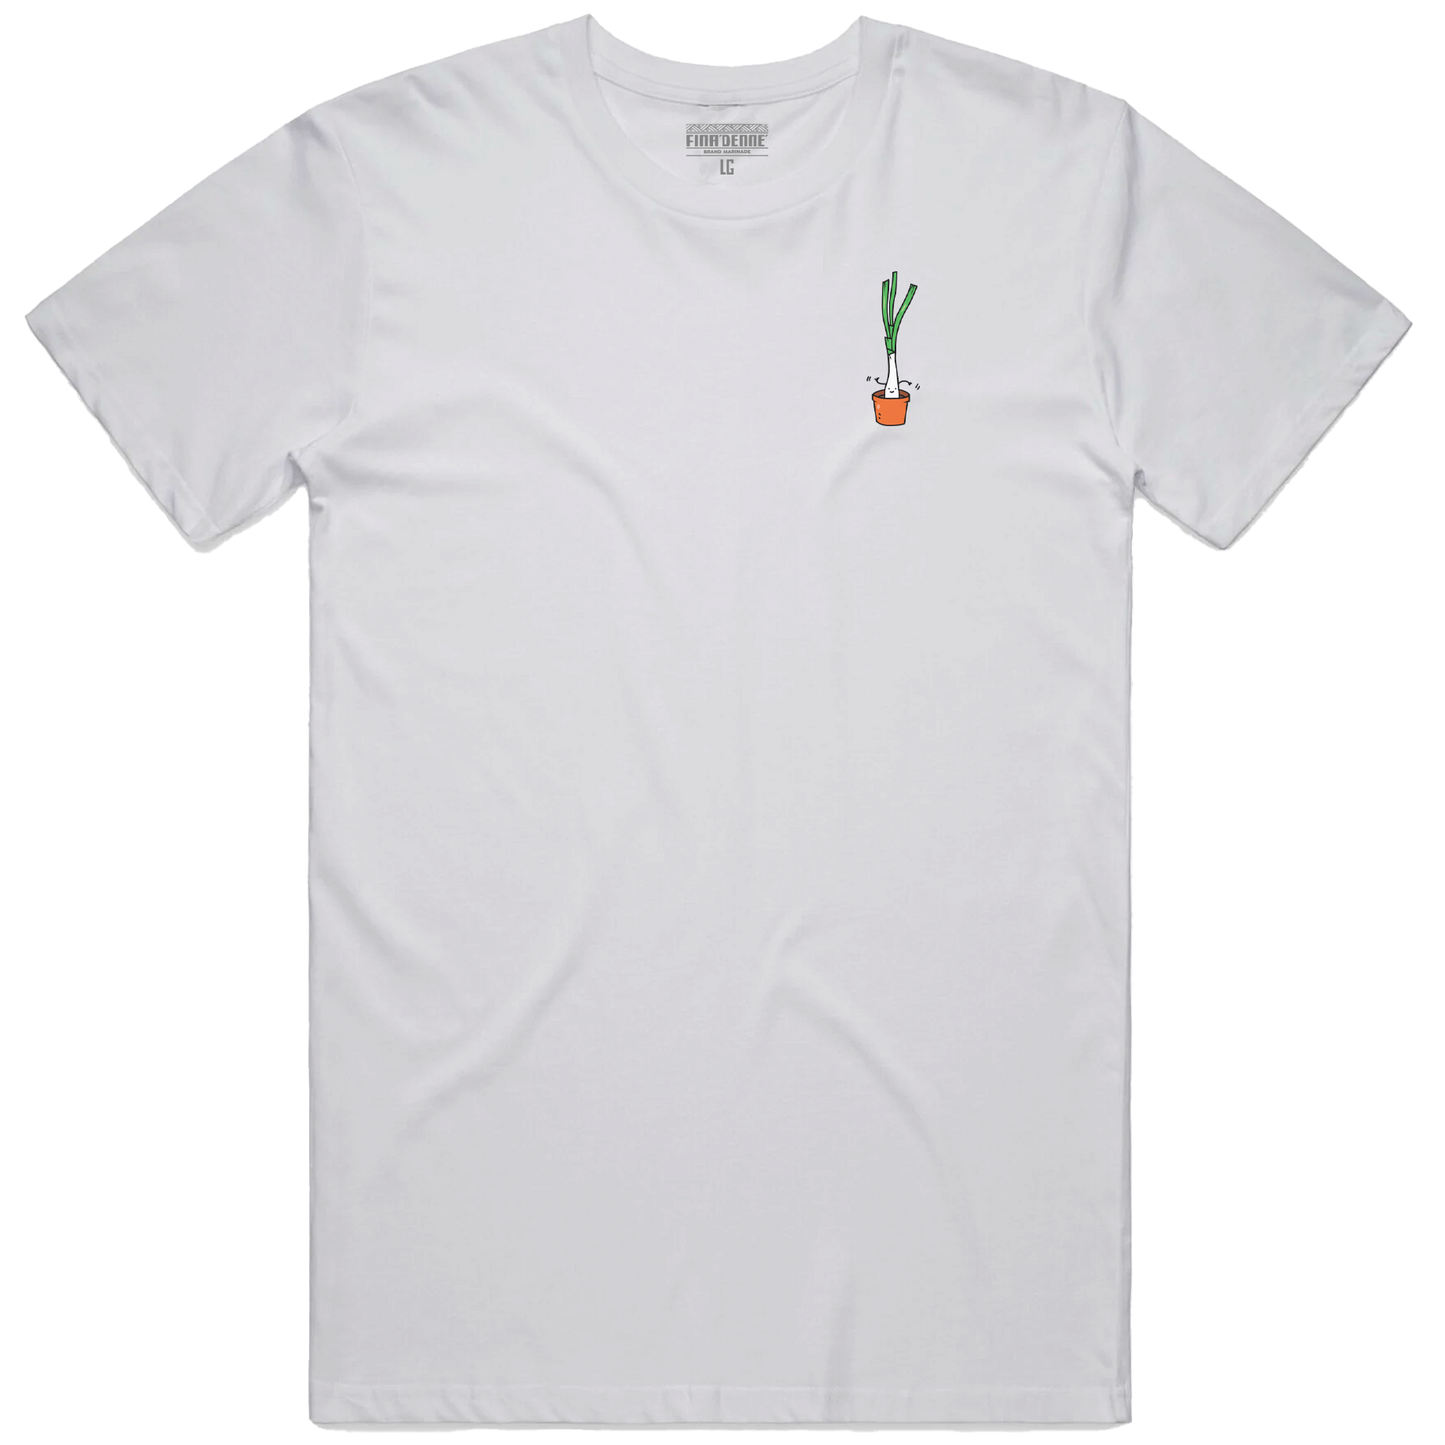 The Official Fina'denne' Band T-Shirt - White